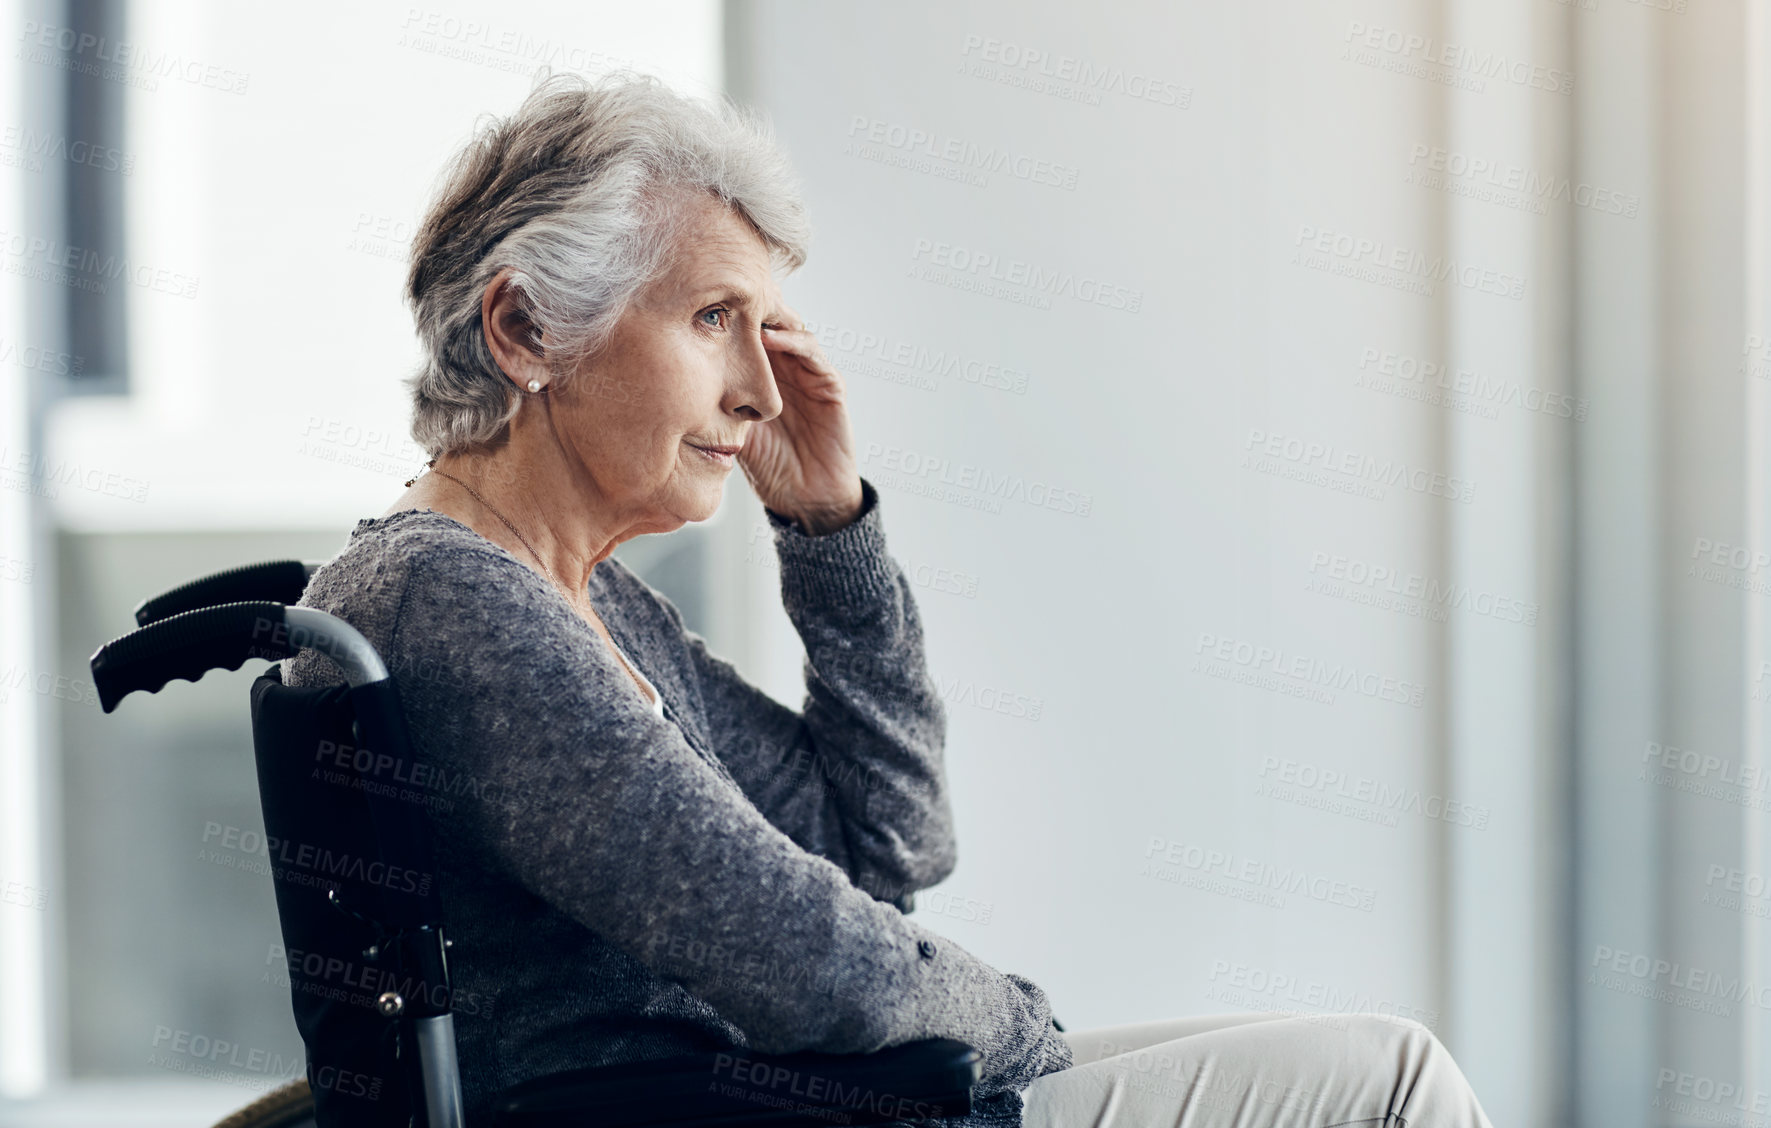 Buy stock photo Cropped shot of a senior woman looking thoughtful while sitting in her wheelchair